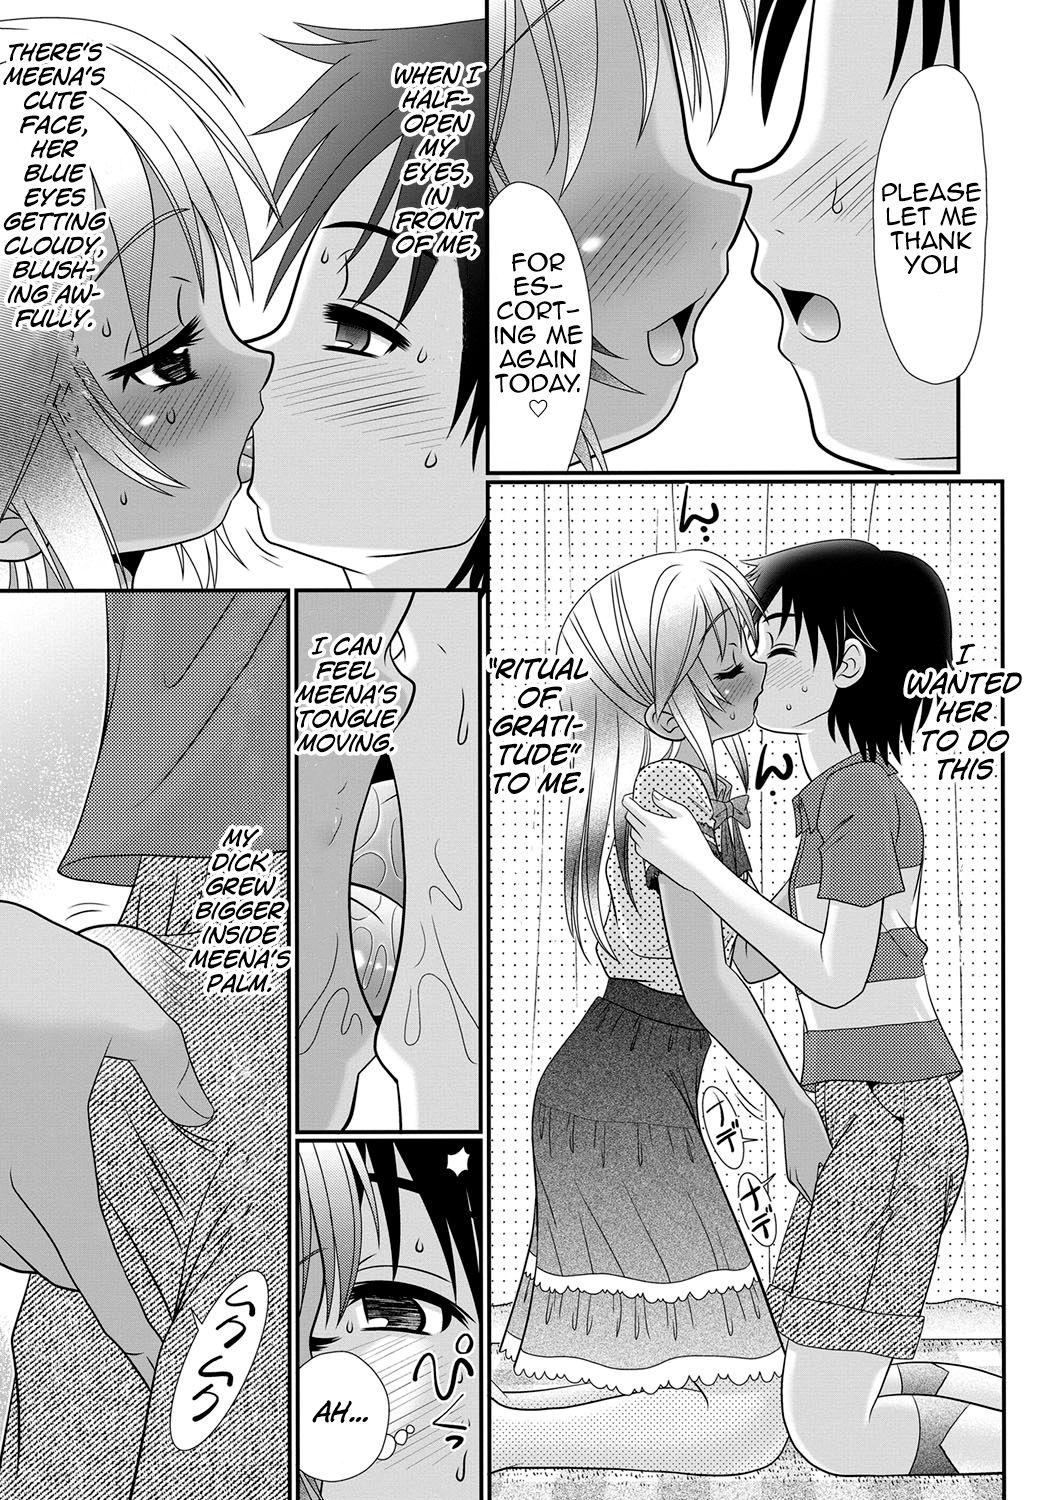 [R-Koga] Hiyake Sex Enikki - Picture Diary of a xxx with the Suntanned Ch.1-2 [Digital] [English] [MrBubbles] 22